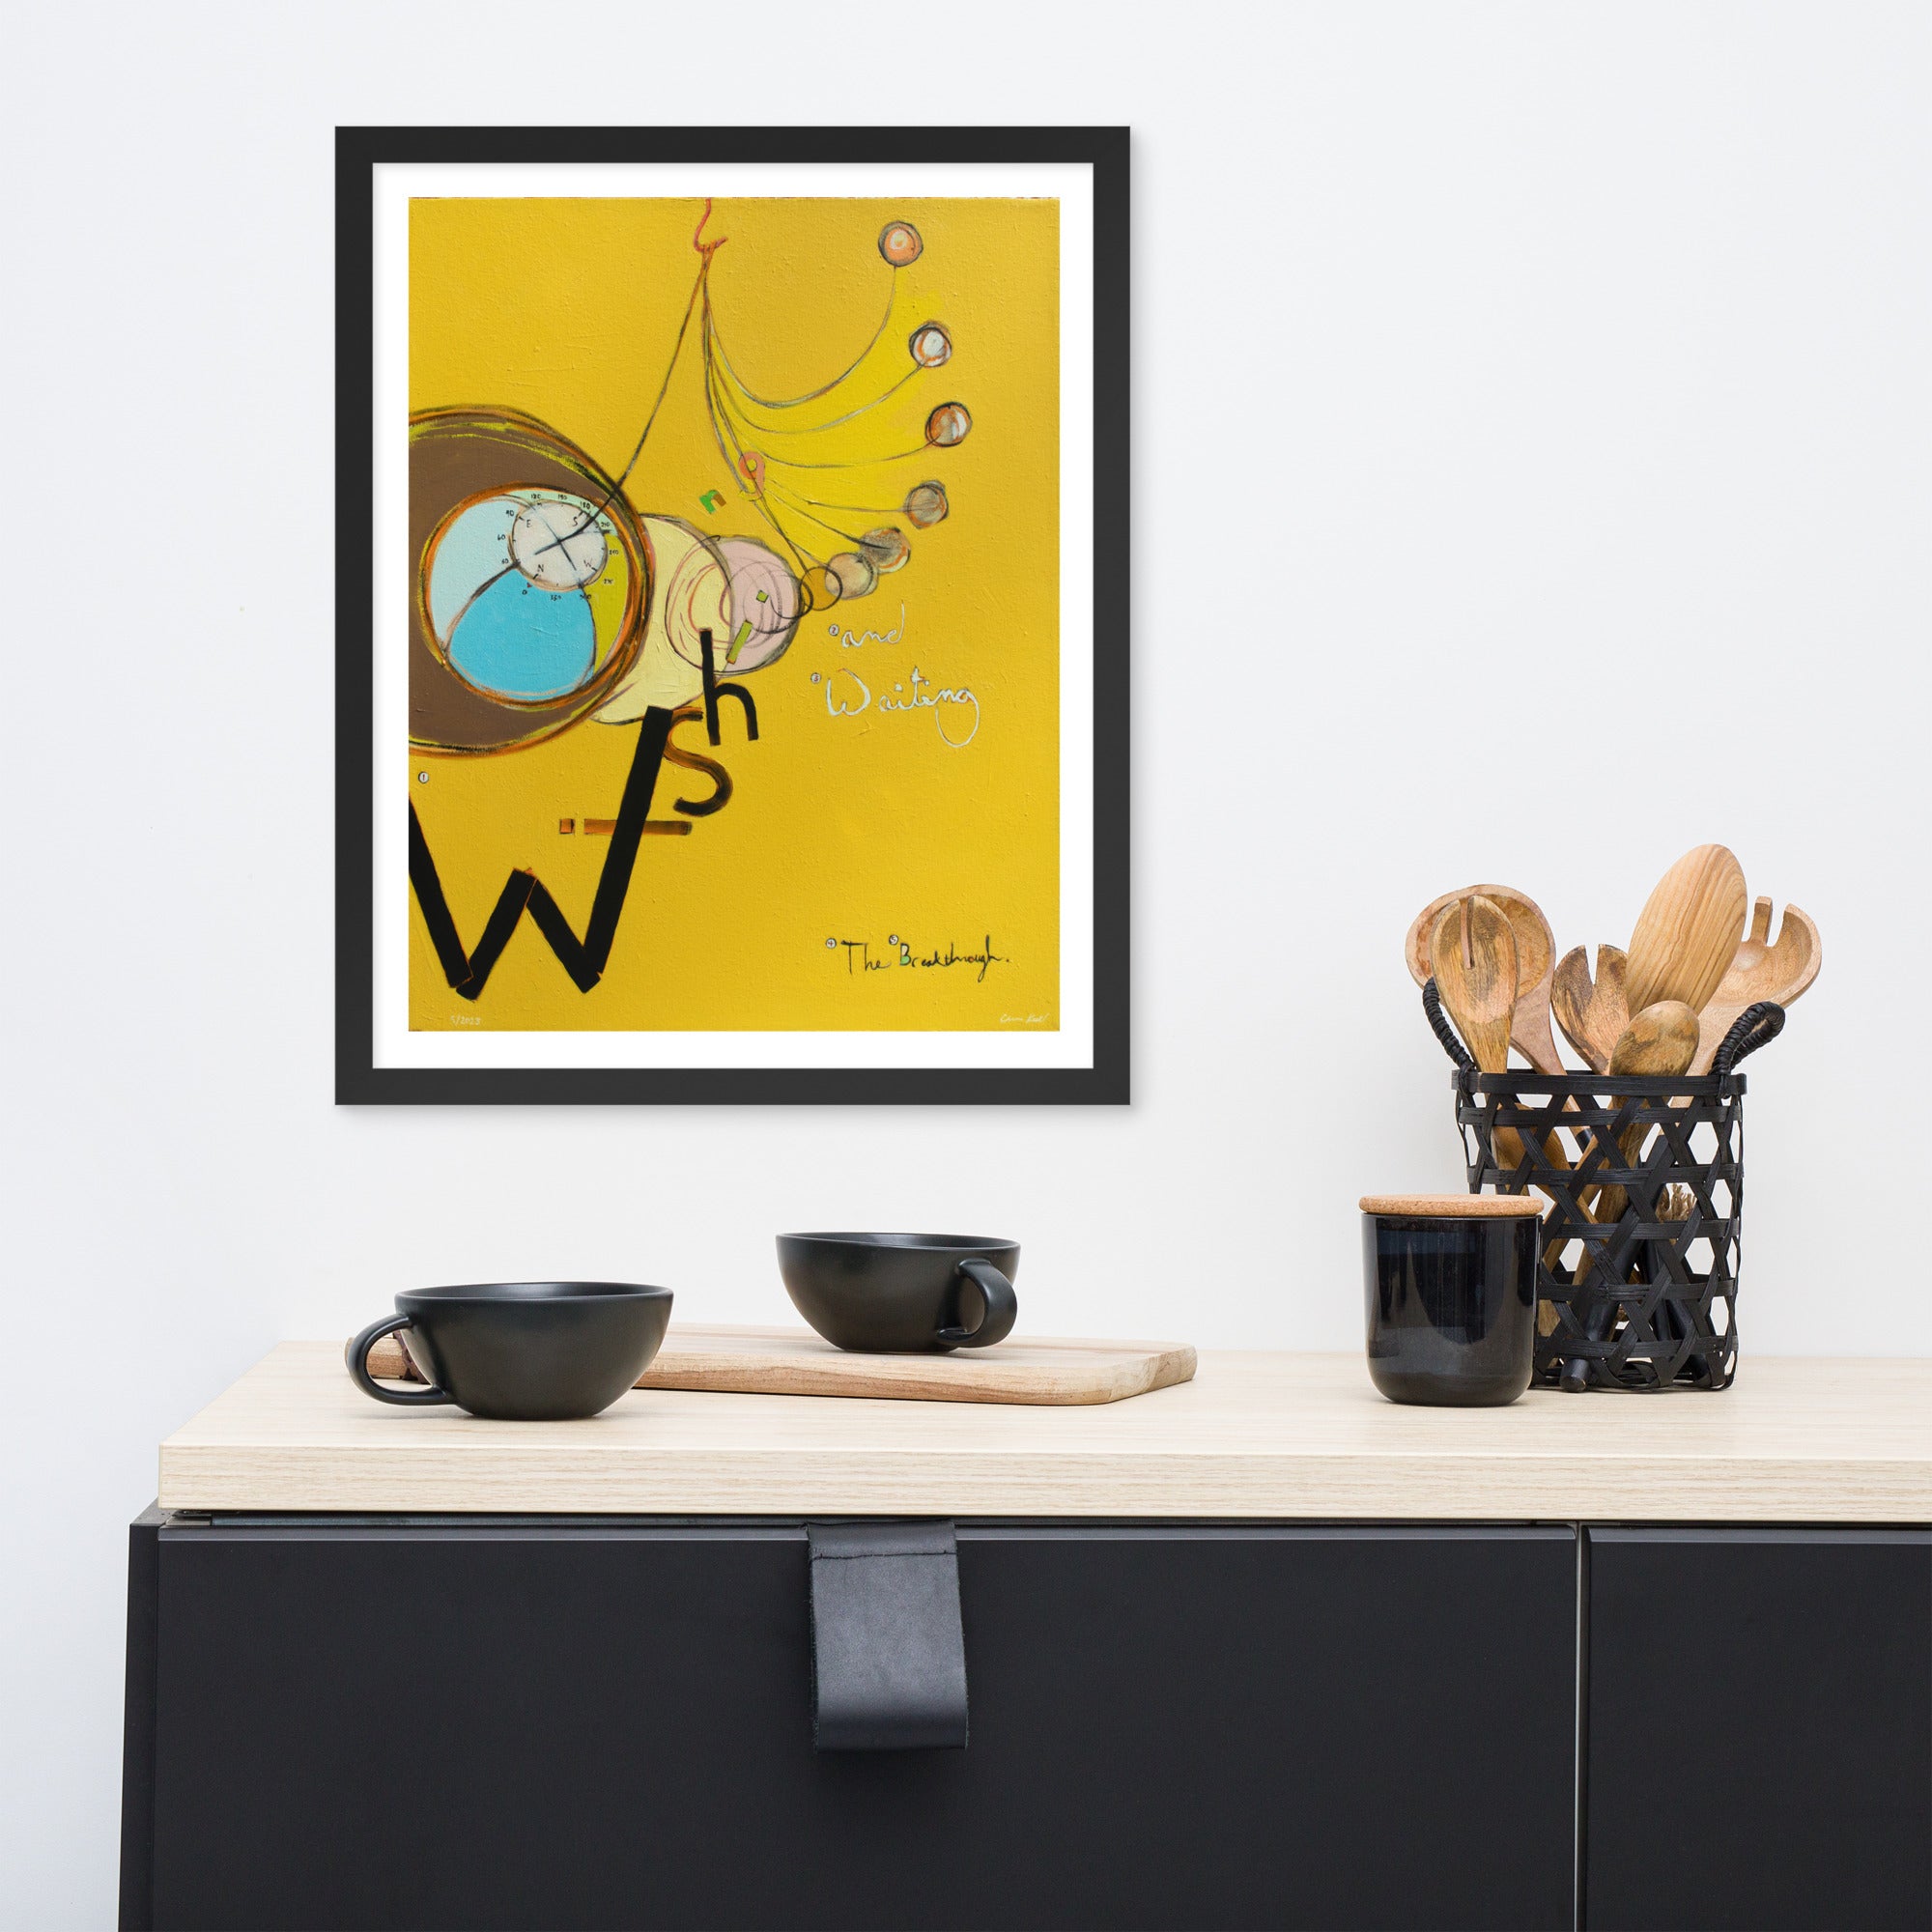 Wishing And Waiting - The Breakthrough #2 [Framed Print]